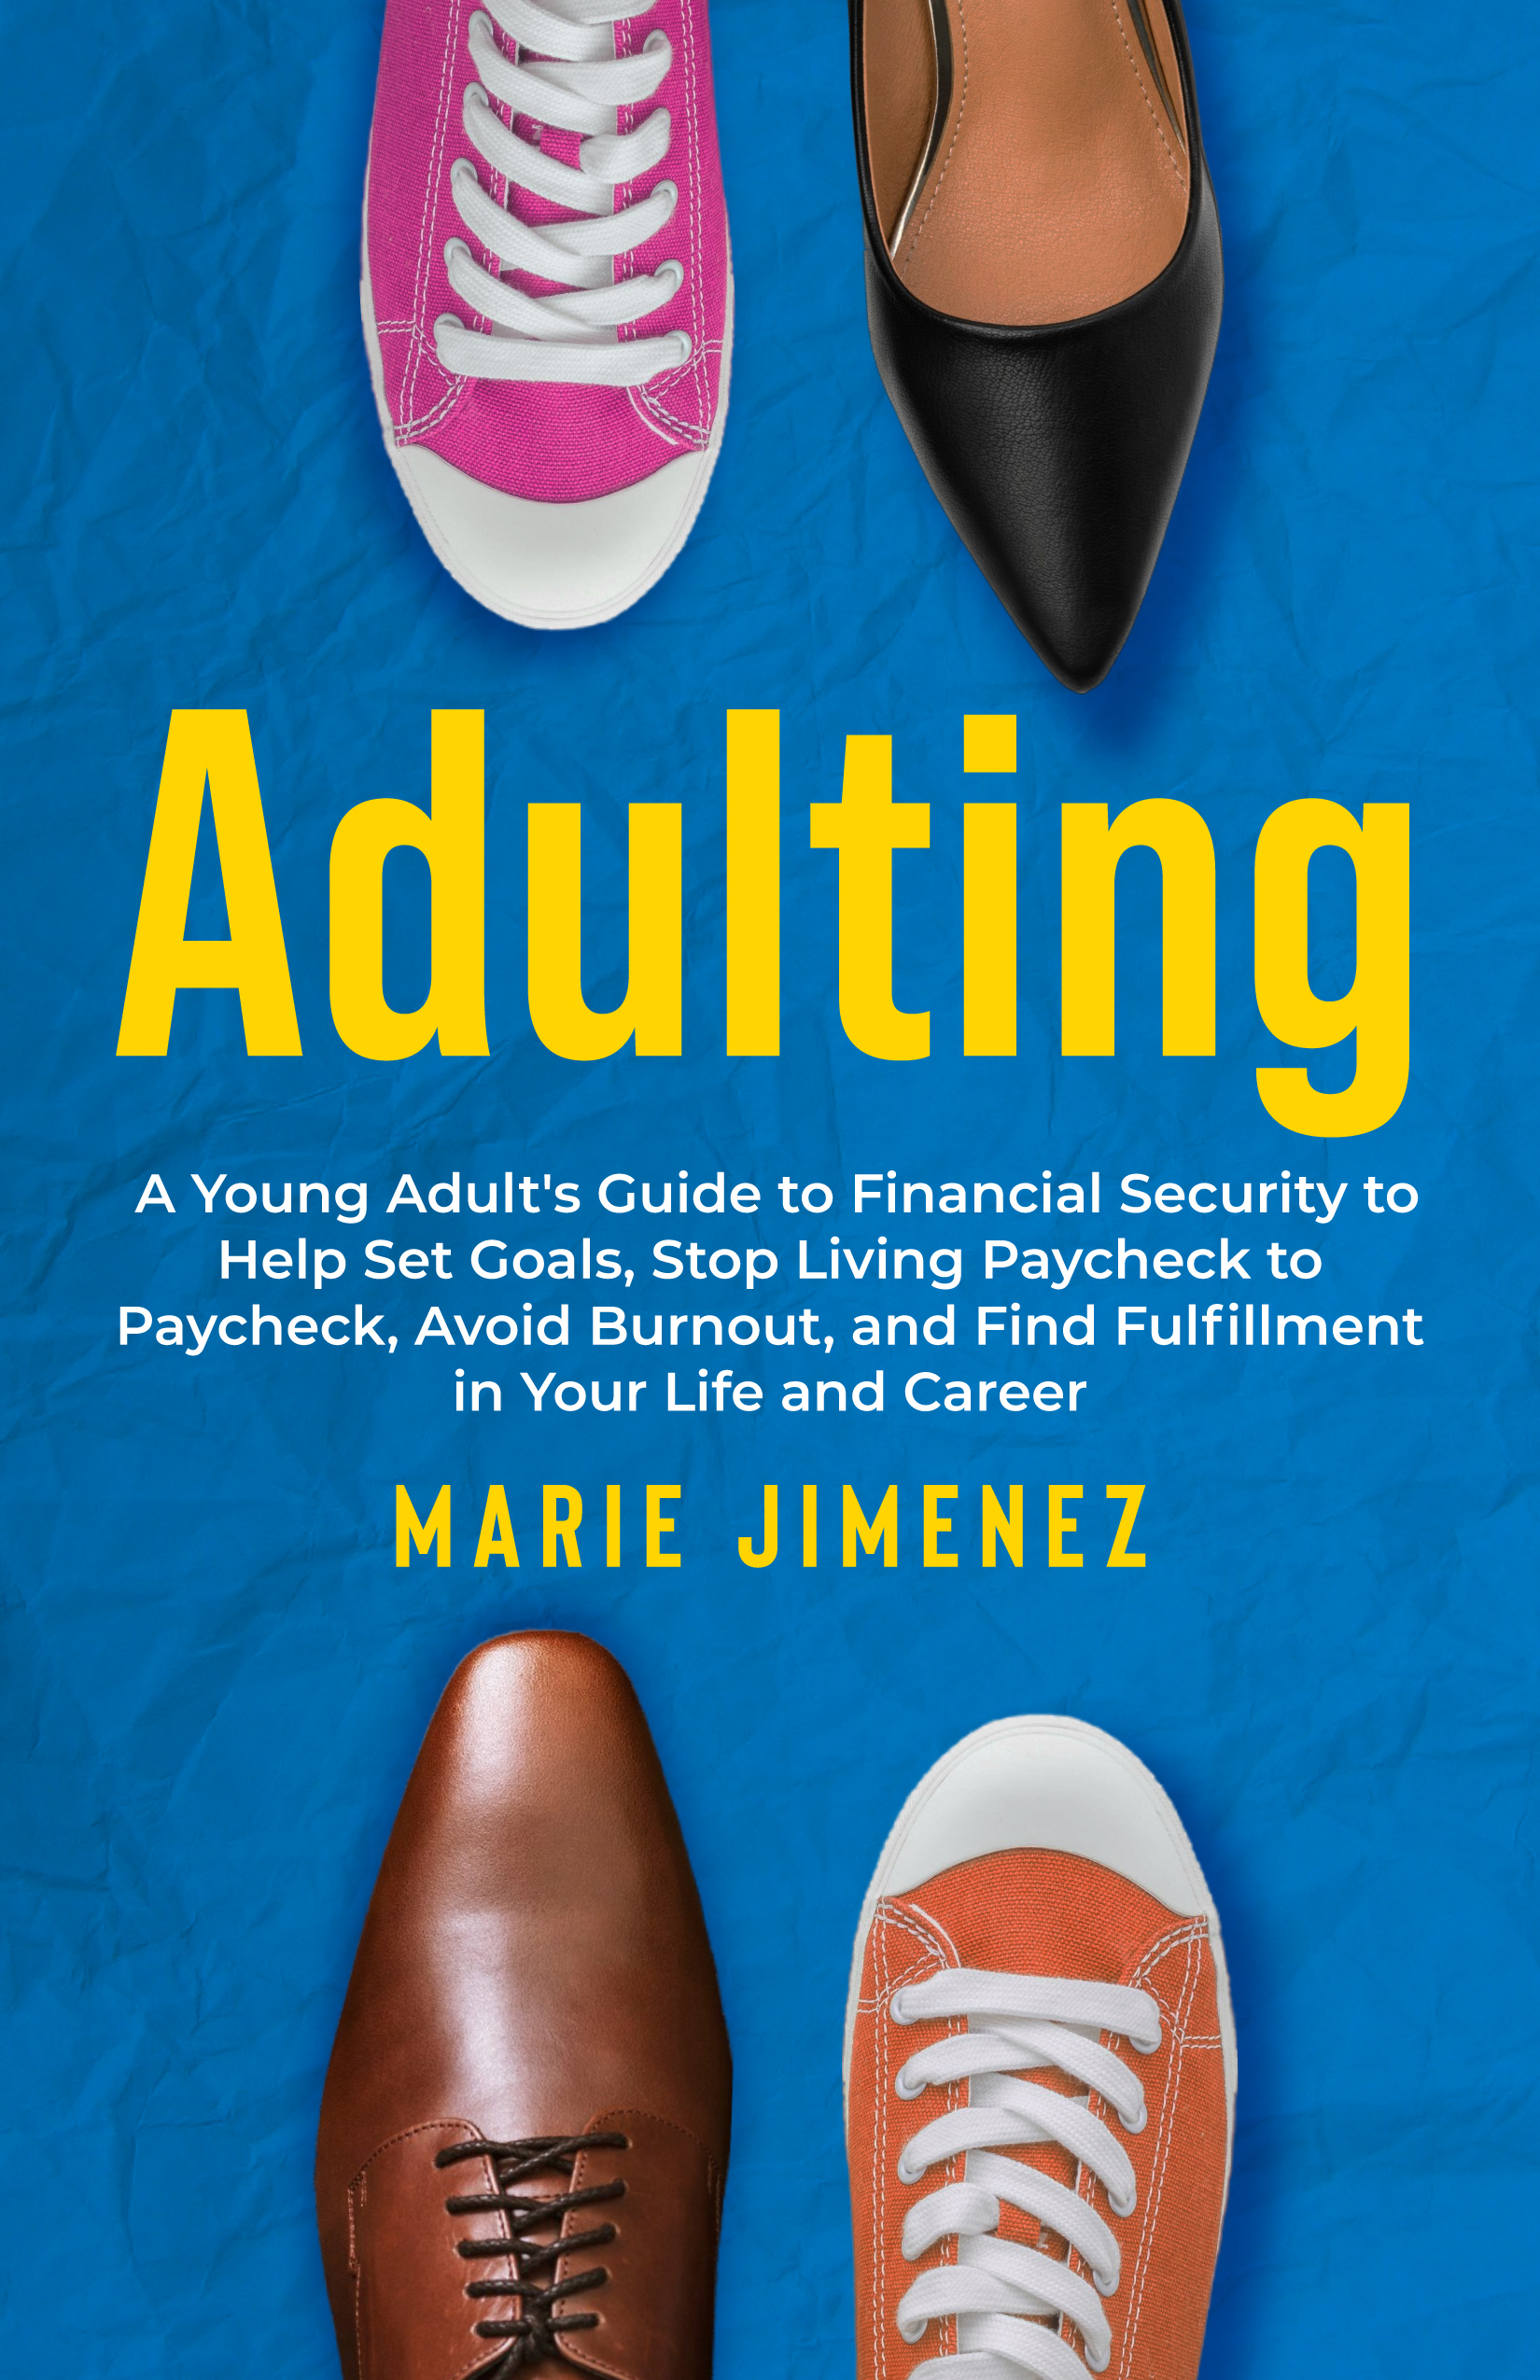 Marie Jimenez Announces the Release of Her New Book "Adulting"